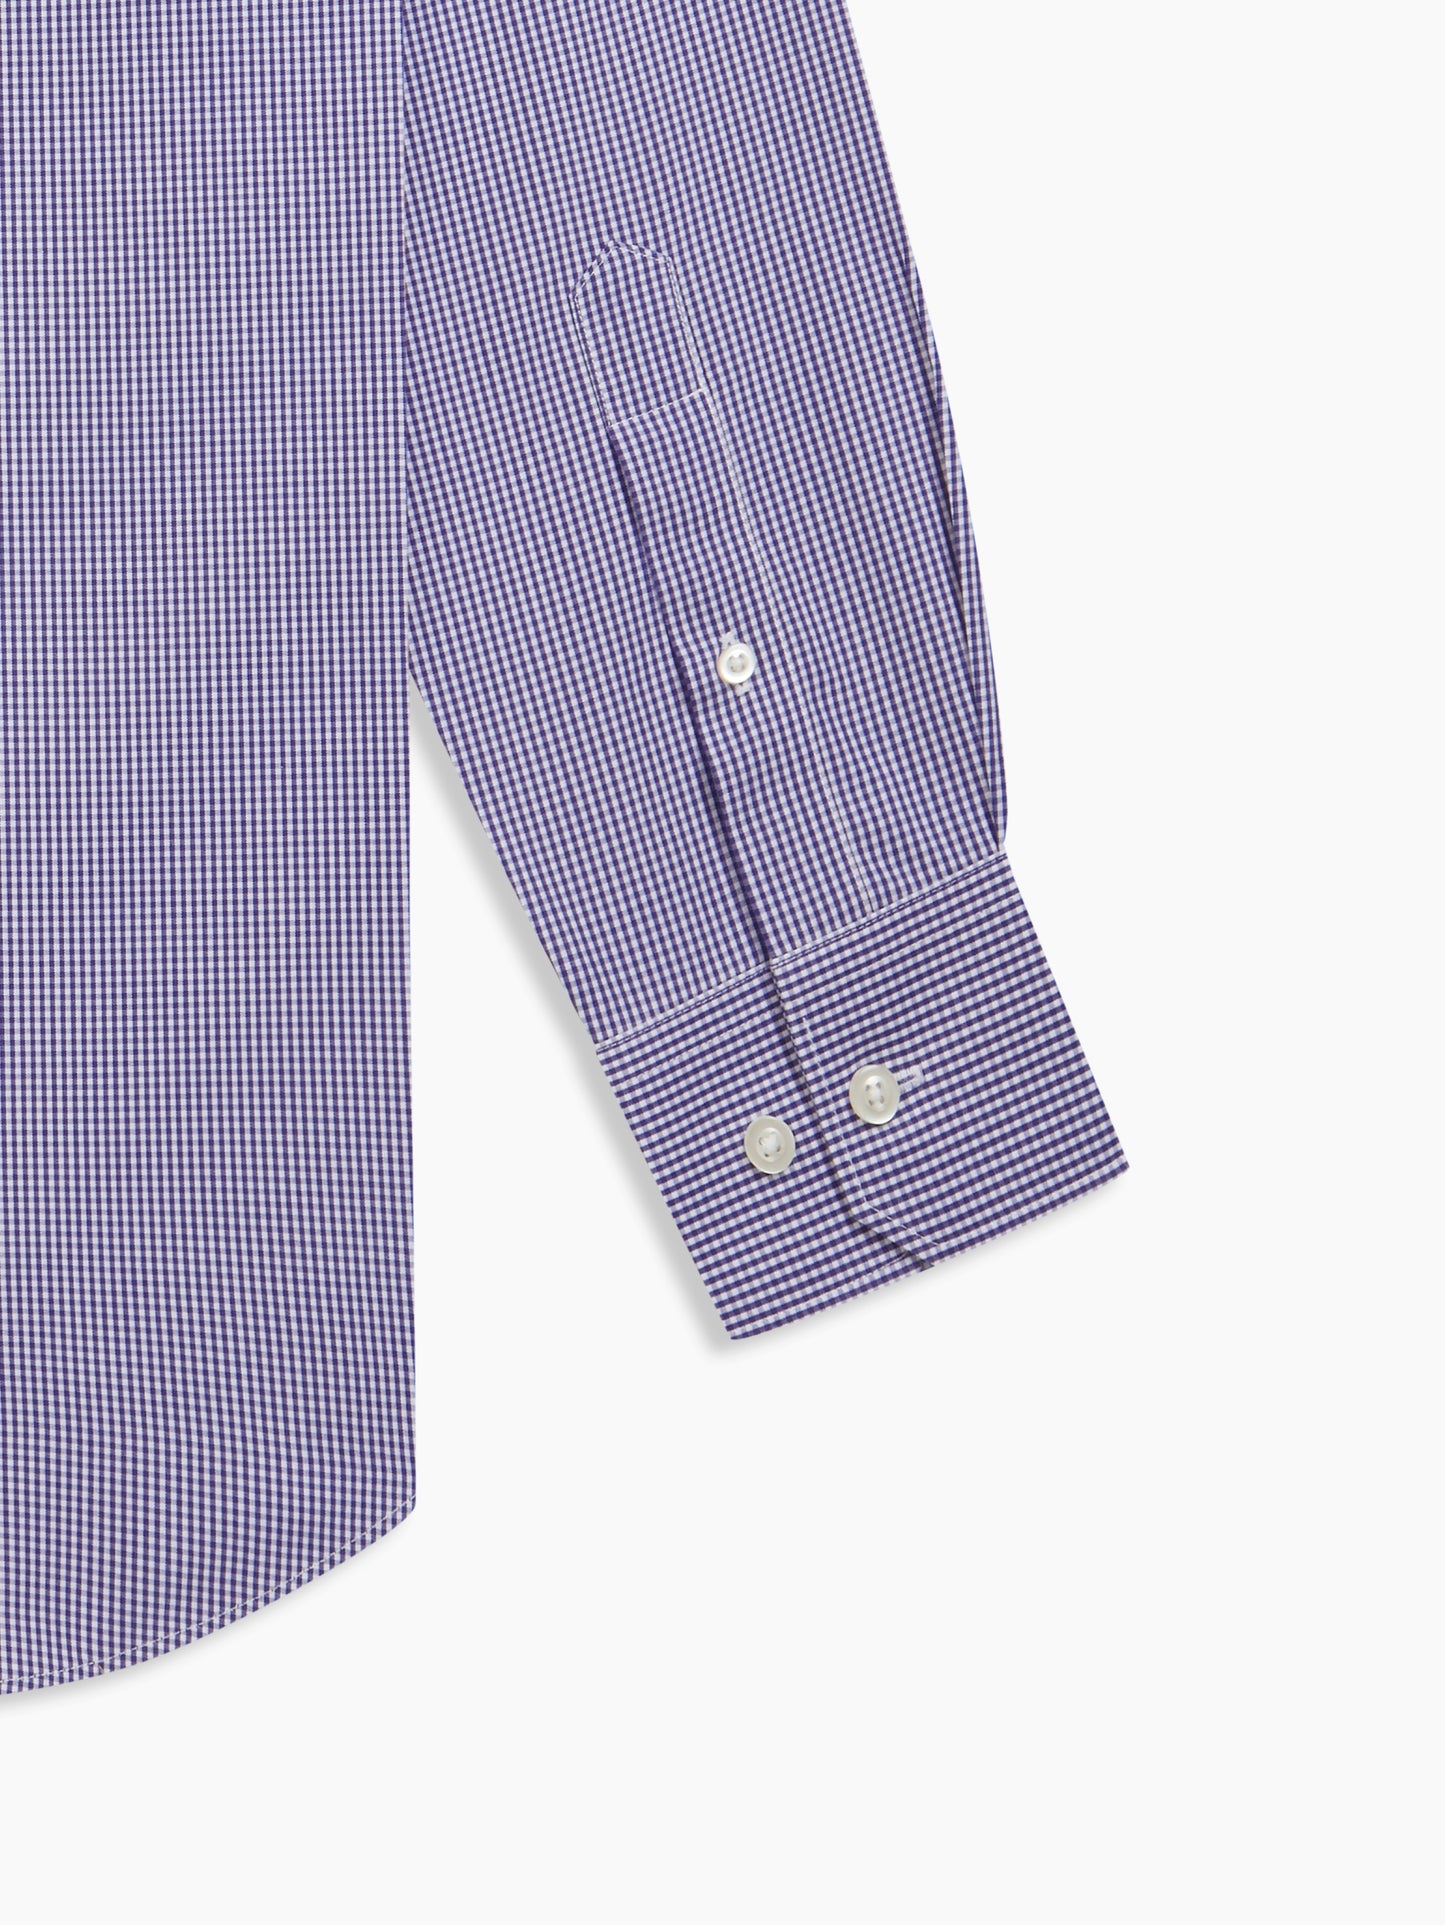 Image 3 of Non-Iron Navy Blue Gingham Poplin Fitted Single Cuff Classic Collar Shirt